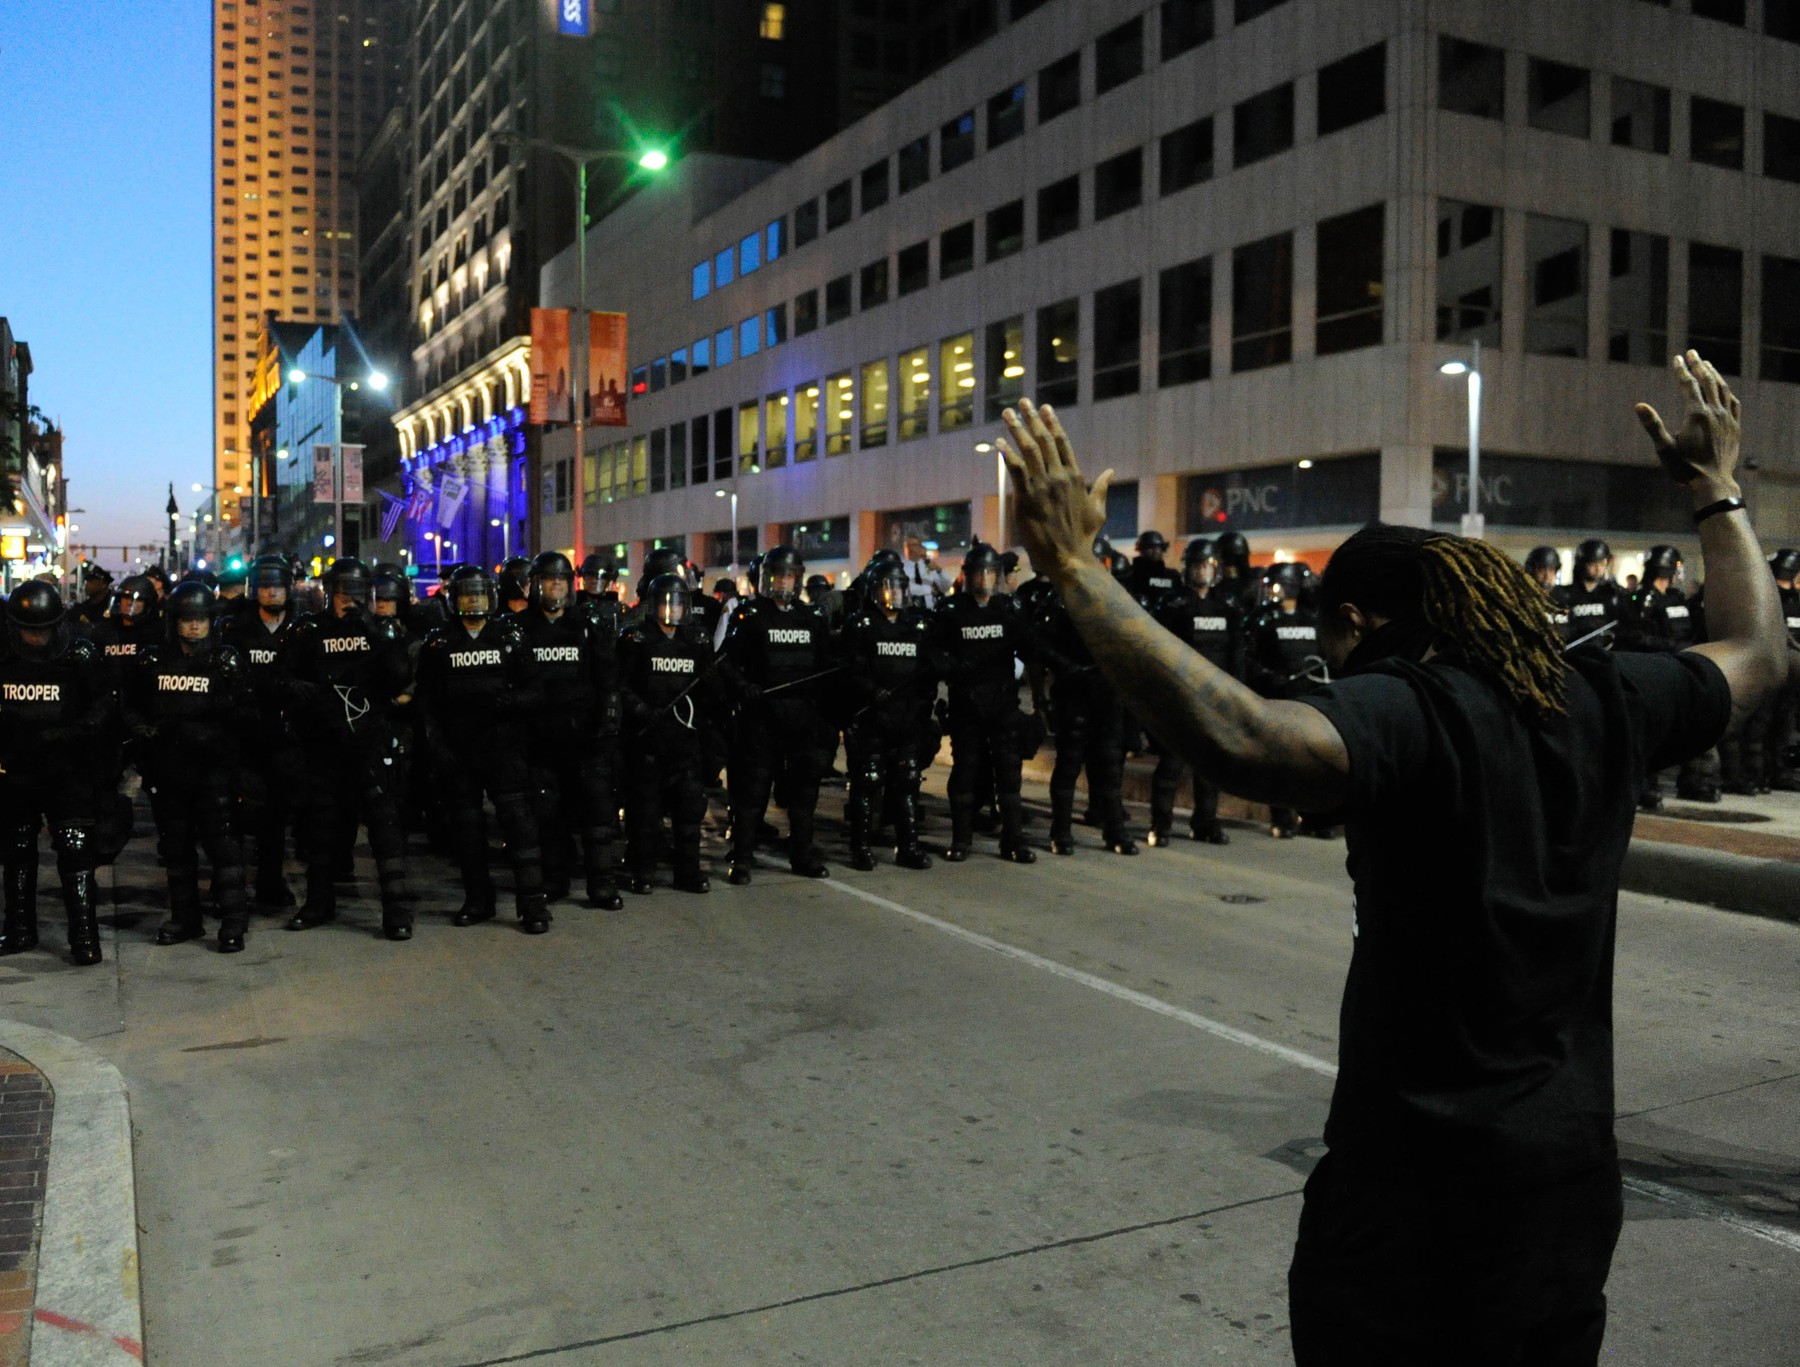 (150524) -- CLEVELAND, May 24, 2015 () -- A protester holds up his hands before police in Cleveland, Ohio, the United States, May 23, 2015. Shortly after a white police officer in the U.S. state of Ohio was found not guilty in the killing of an unarmed black man and woman after a 22-mile car chase in November 2012, U.S. Justice Department announced that it would review the case.,Image: 246289634, License: Rights-managed, Restrictions: , Model Release: no, Credit line: Bao Dandan / Avalon / Profimedia